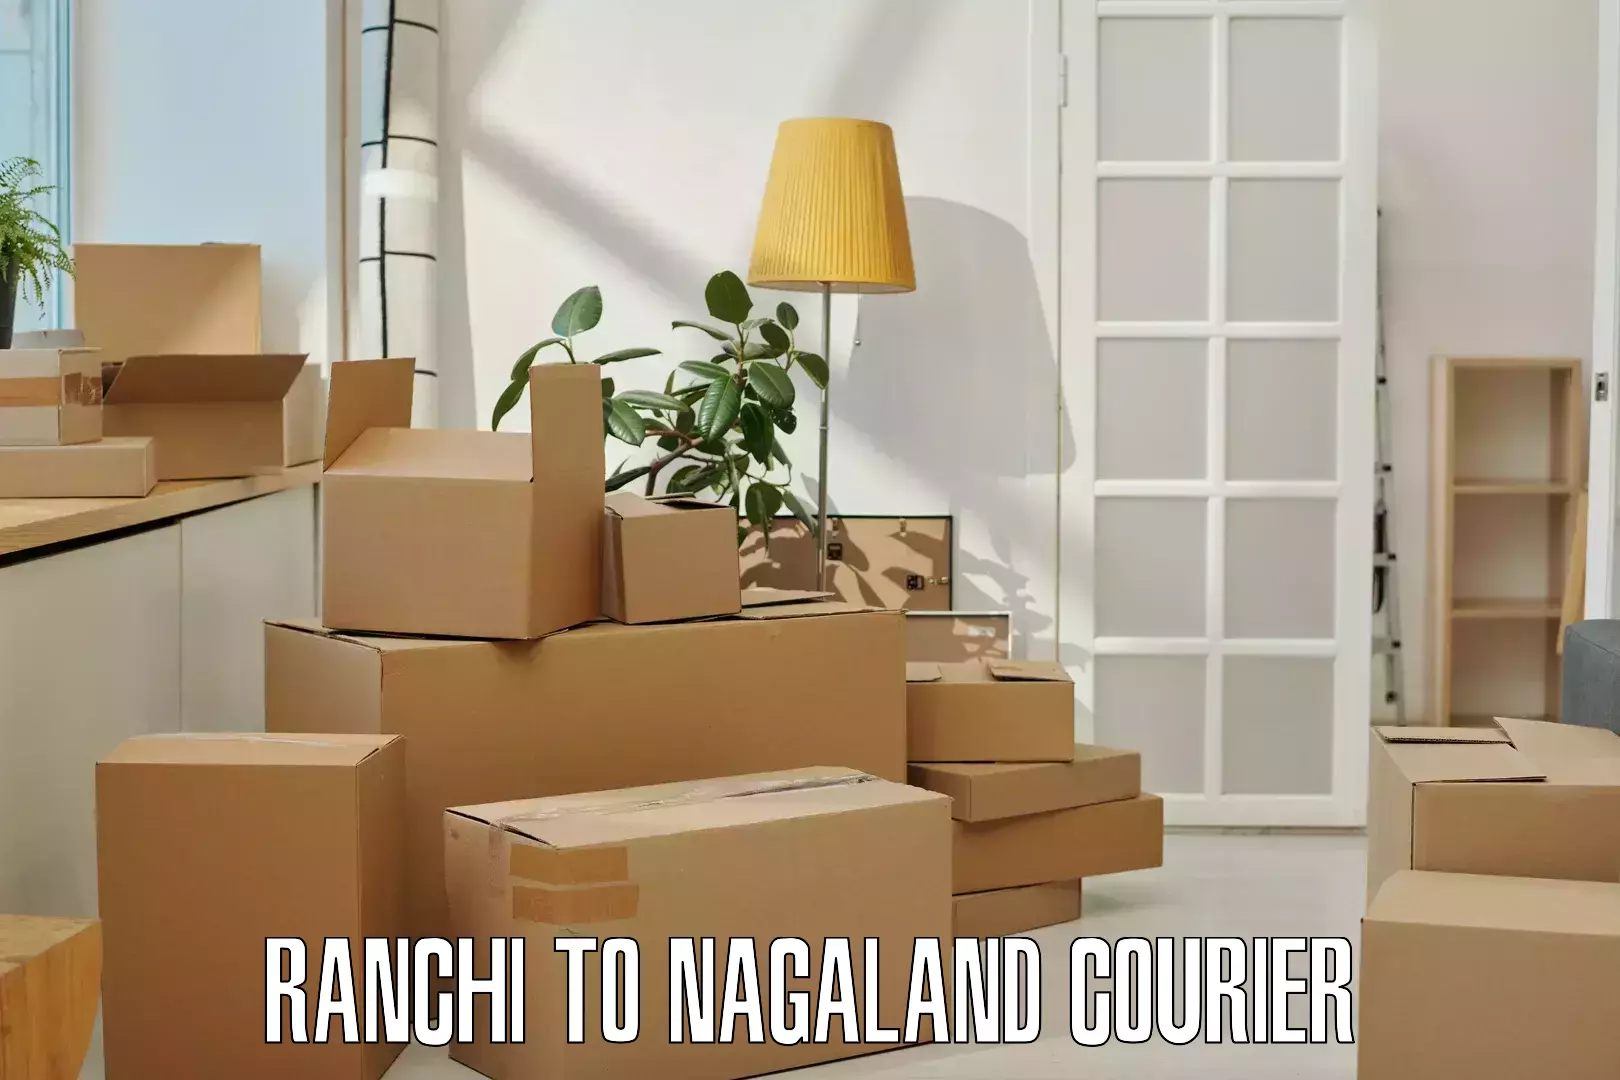 Courier service innovation Ranchi to Nagaland